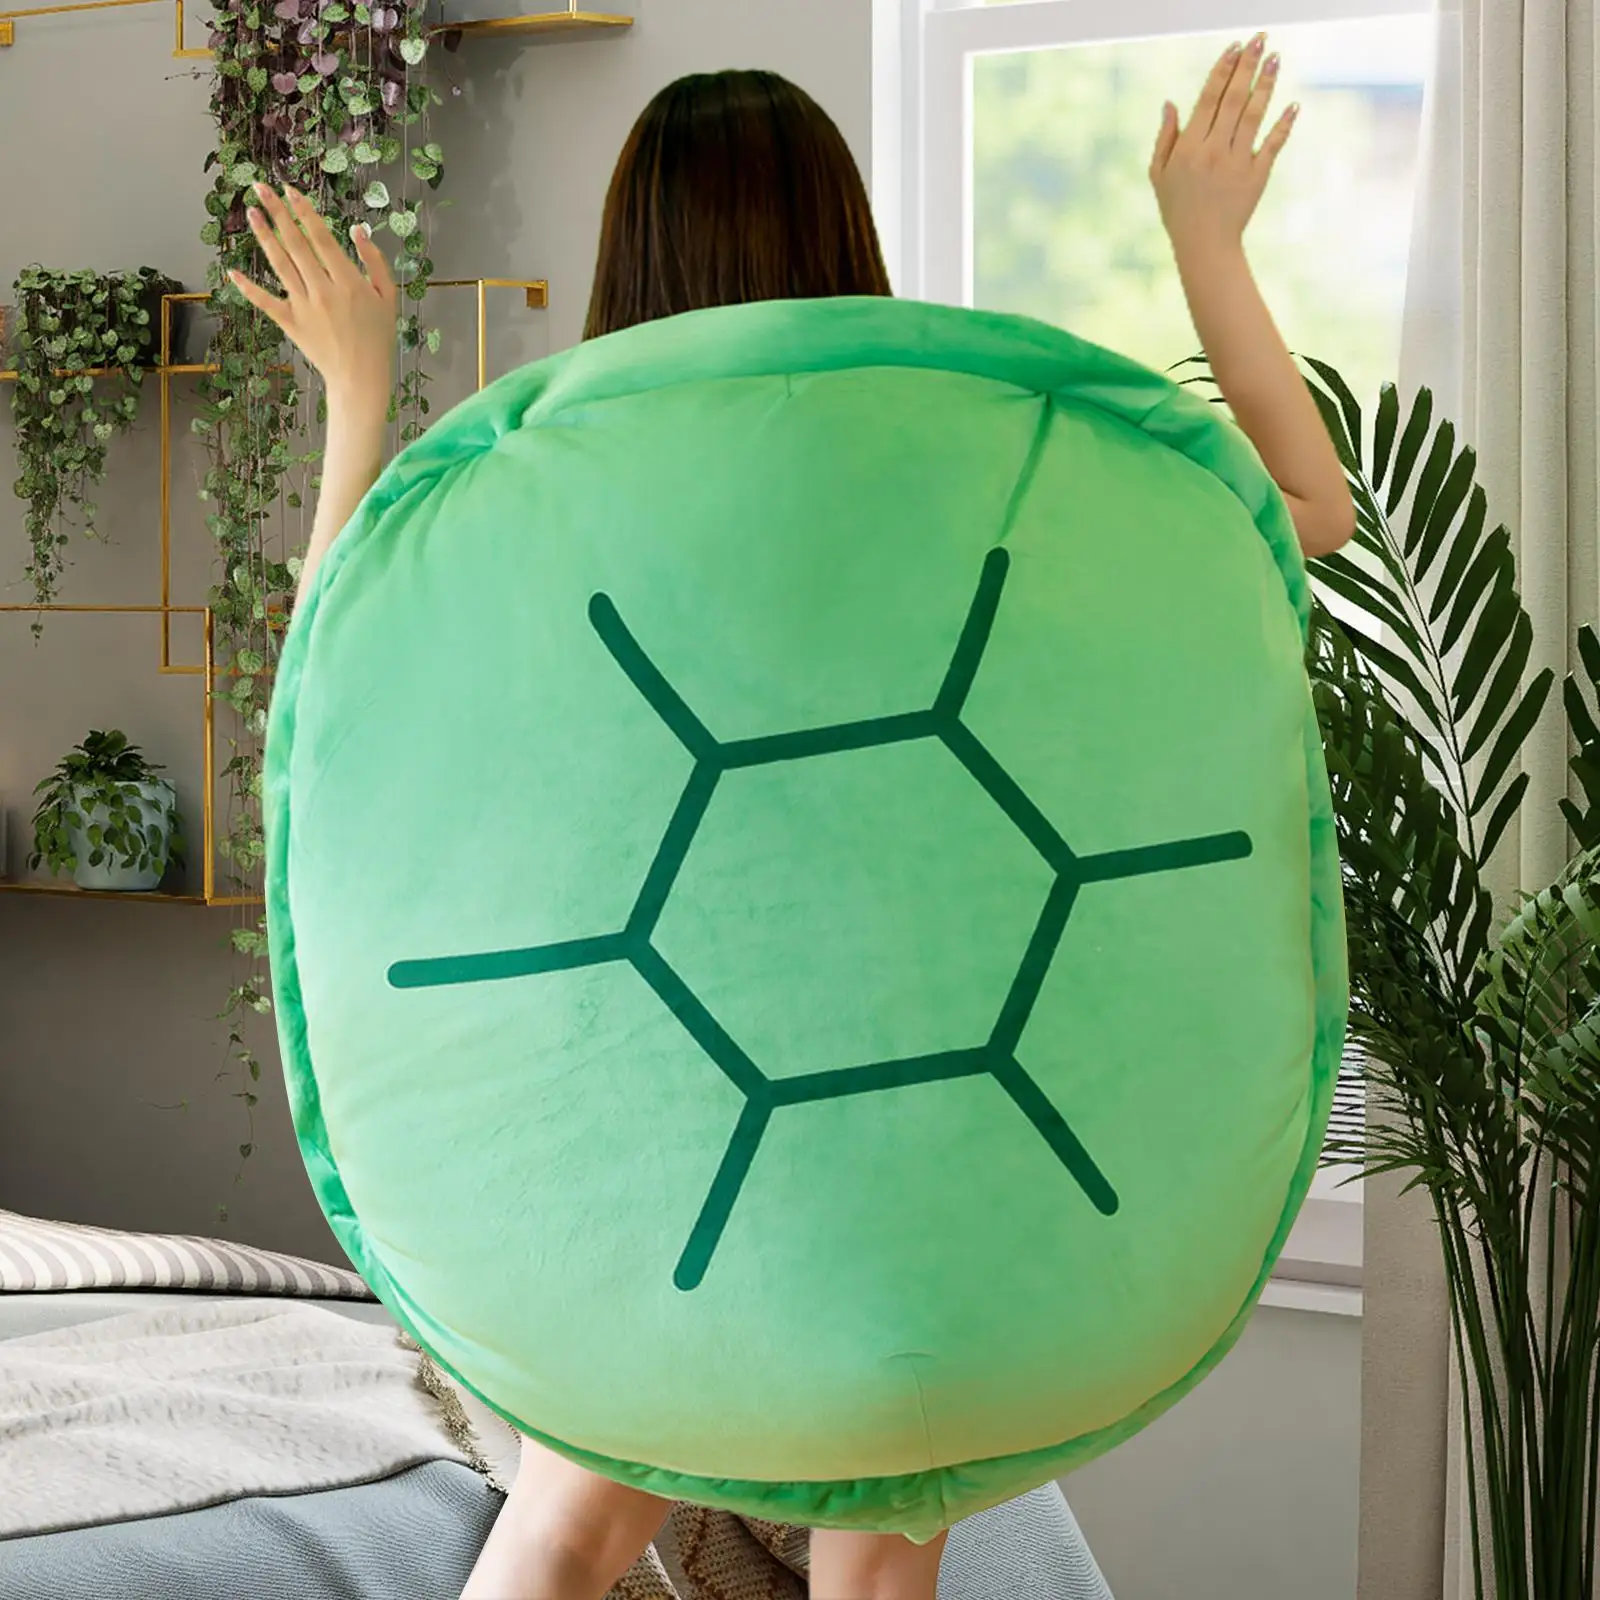 Creative Wearable Turtle Shell Plush Toy Funny Dress Up Sleeping Pillow Stuffed Animal Costume Toy for Cosplay Role Playing Game